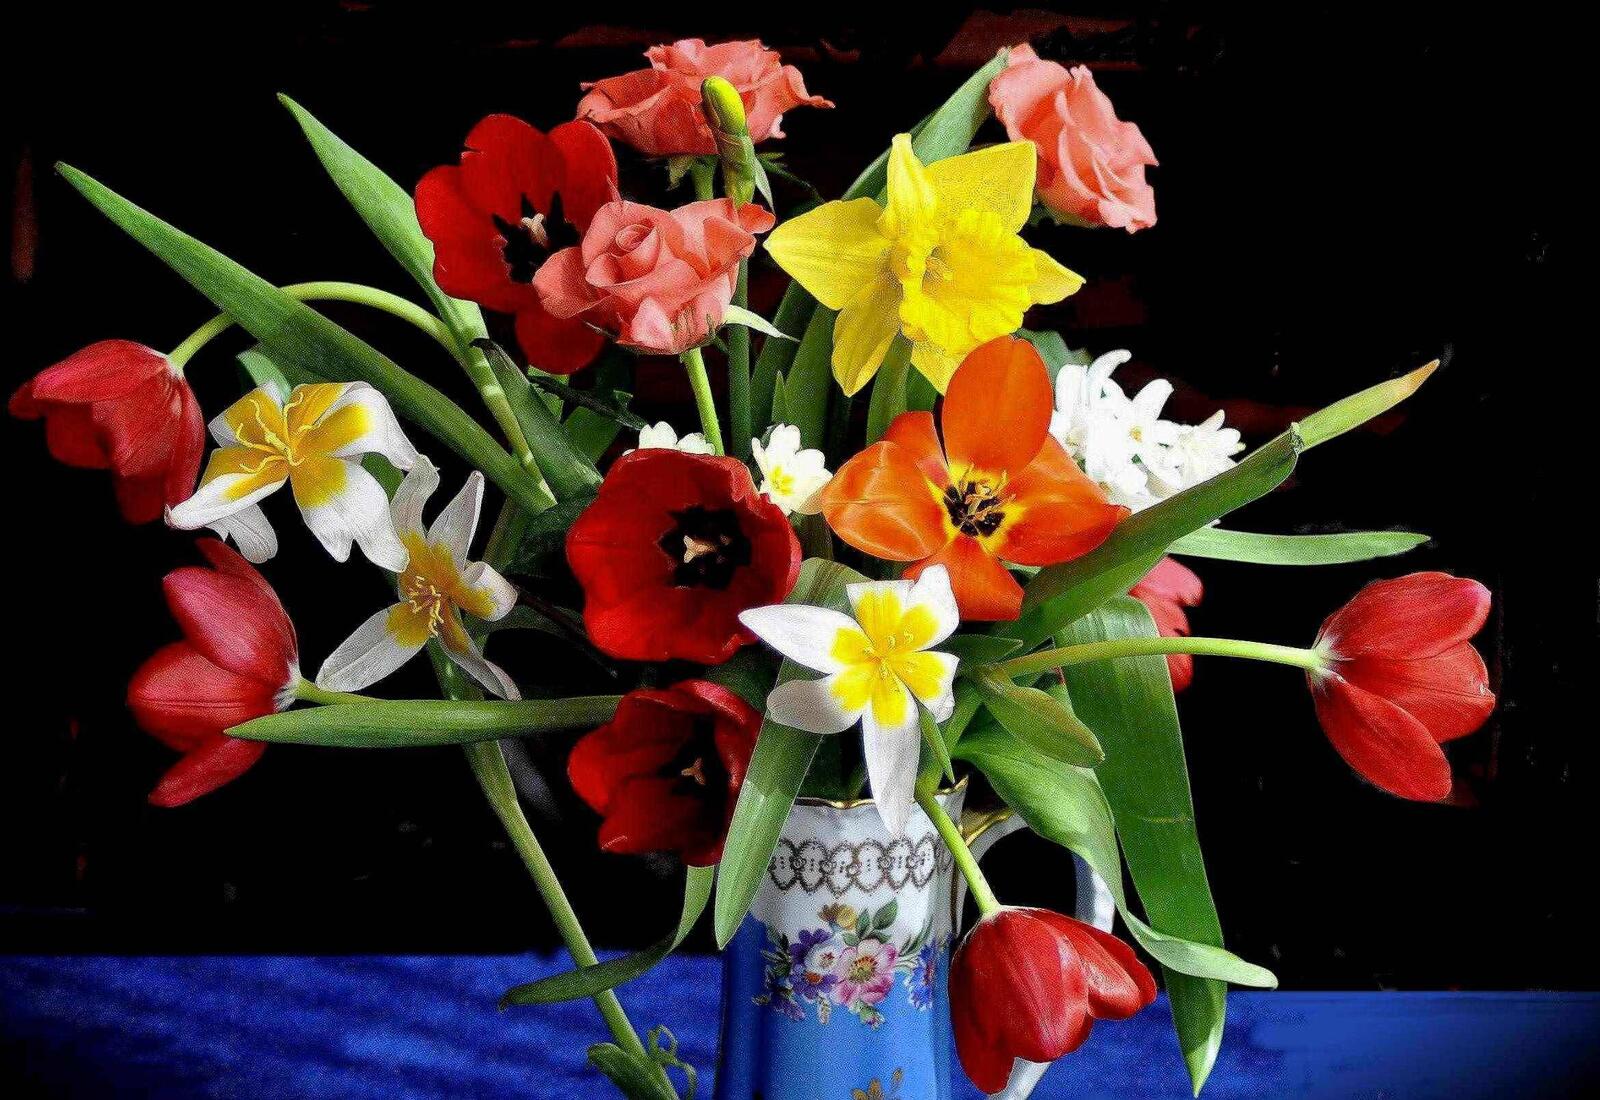 Wallpapers daffodils tulips vase on the desktop